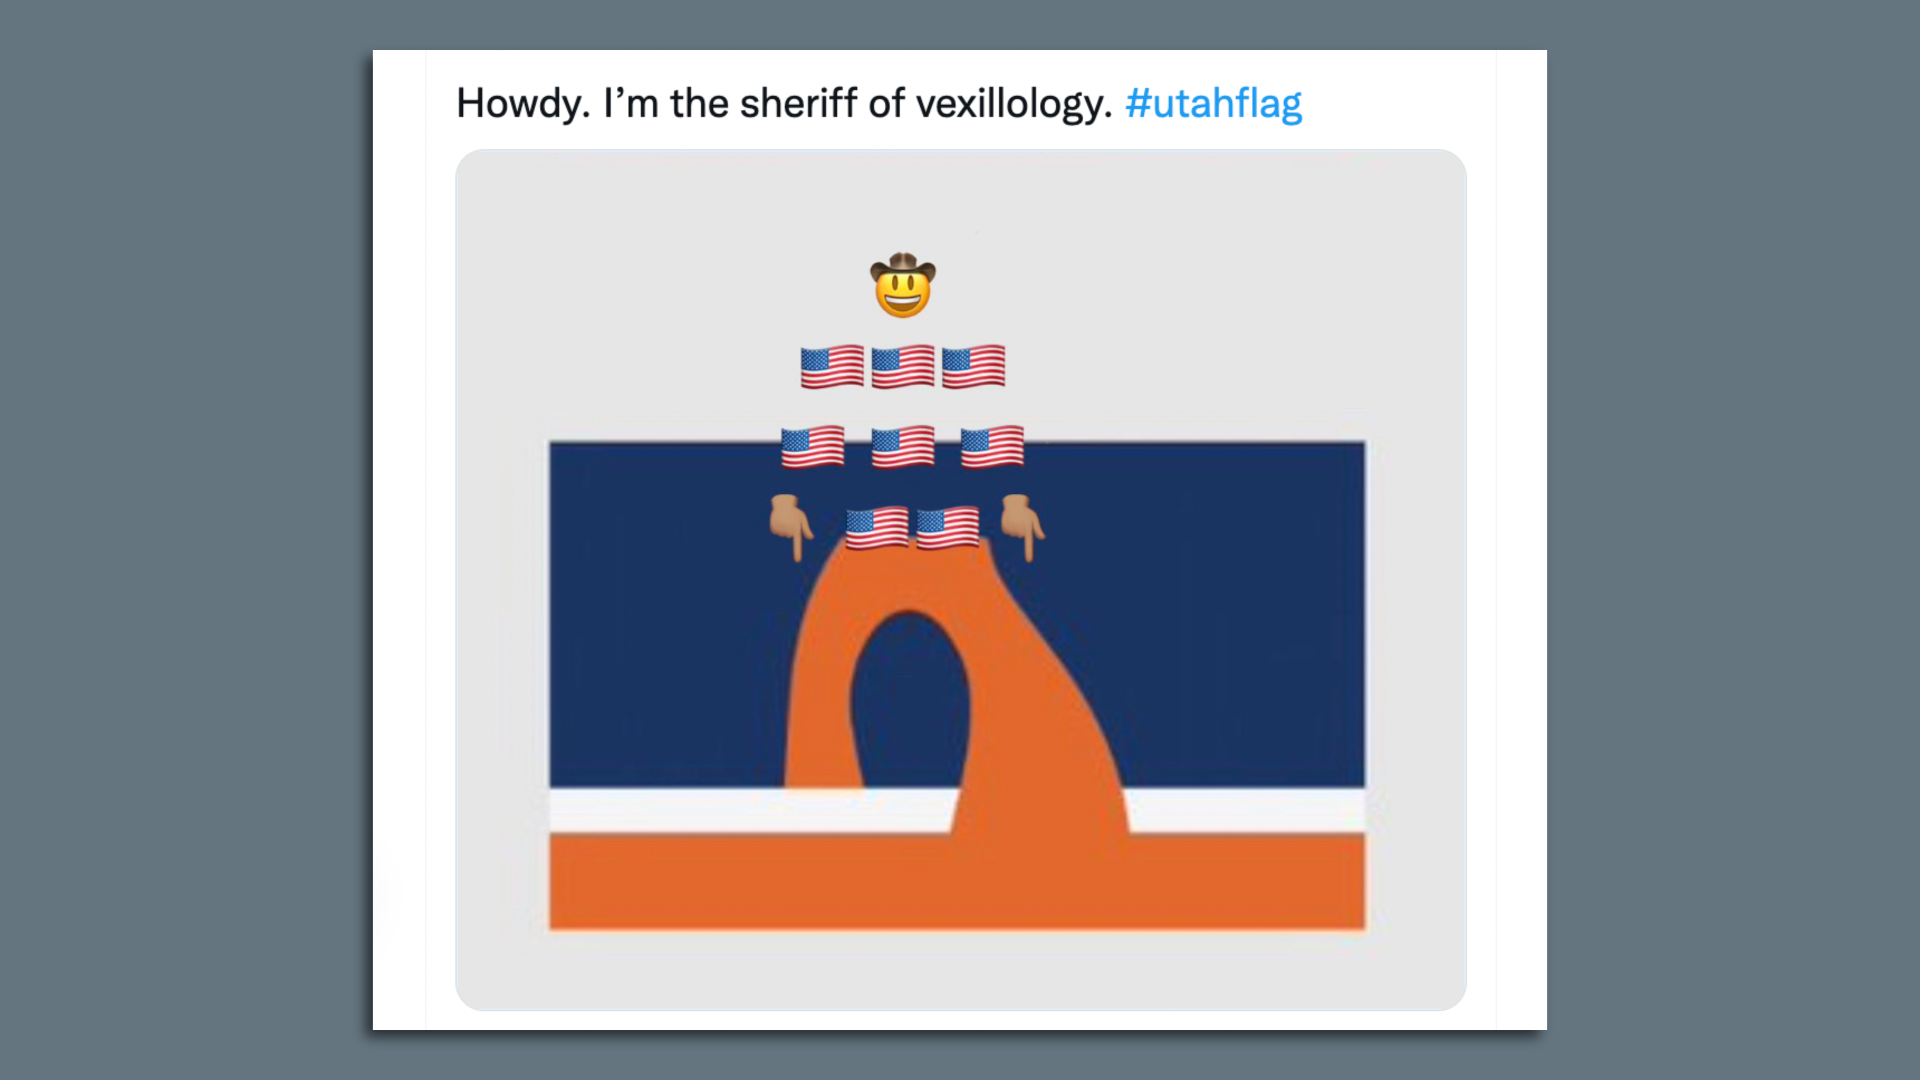 A photoshopped mockup of a proposed Utah state flag design shows delicate arch as chaps worn by a cartoon cowboy. The attached Tweet reads: "Howdy. I’m the sheriff of vexillology. #utahflag"